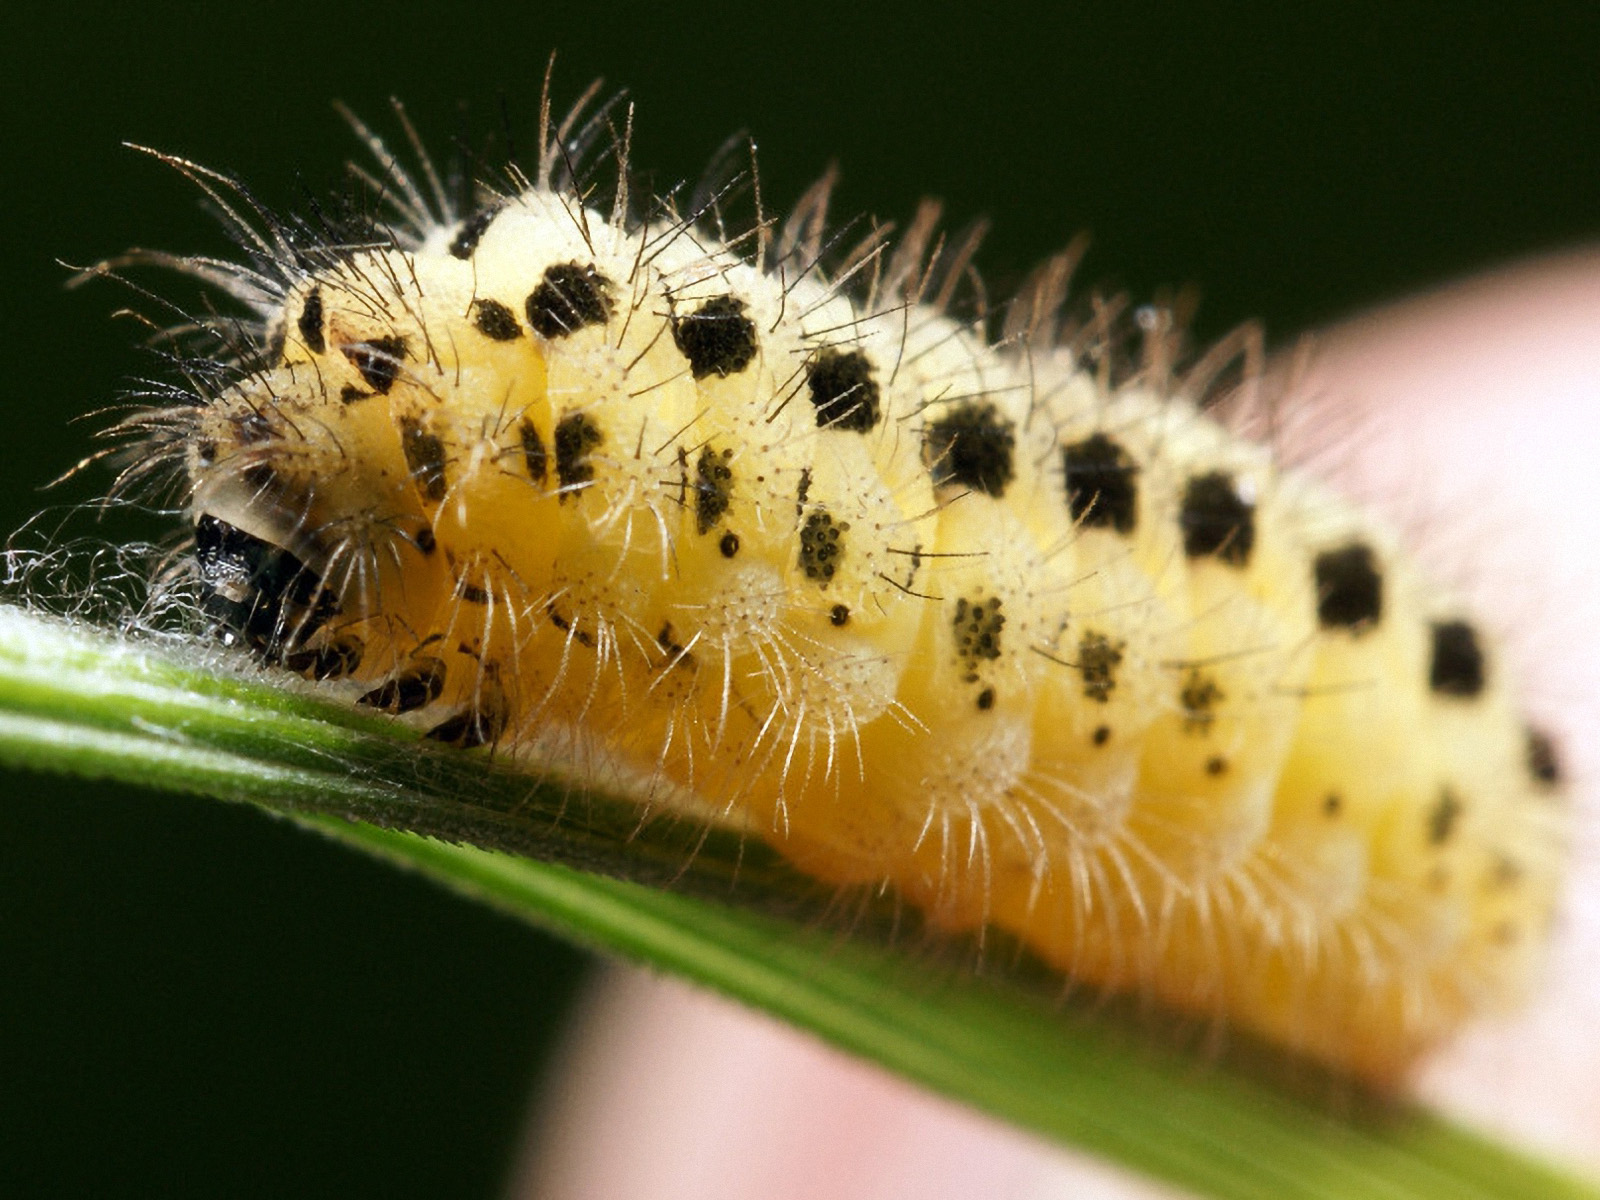 A+Very+Fat+Yellow+Caterpillar+With+Black+Dotss+On+His+Body.jpg